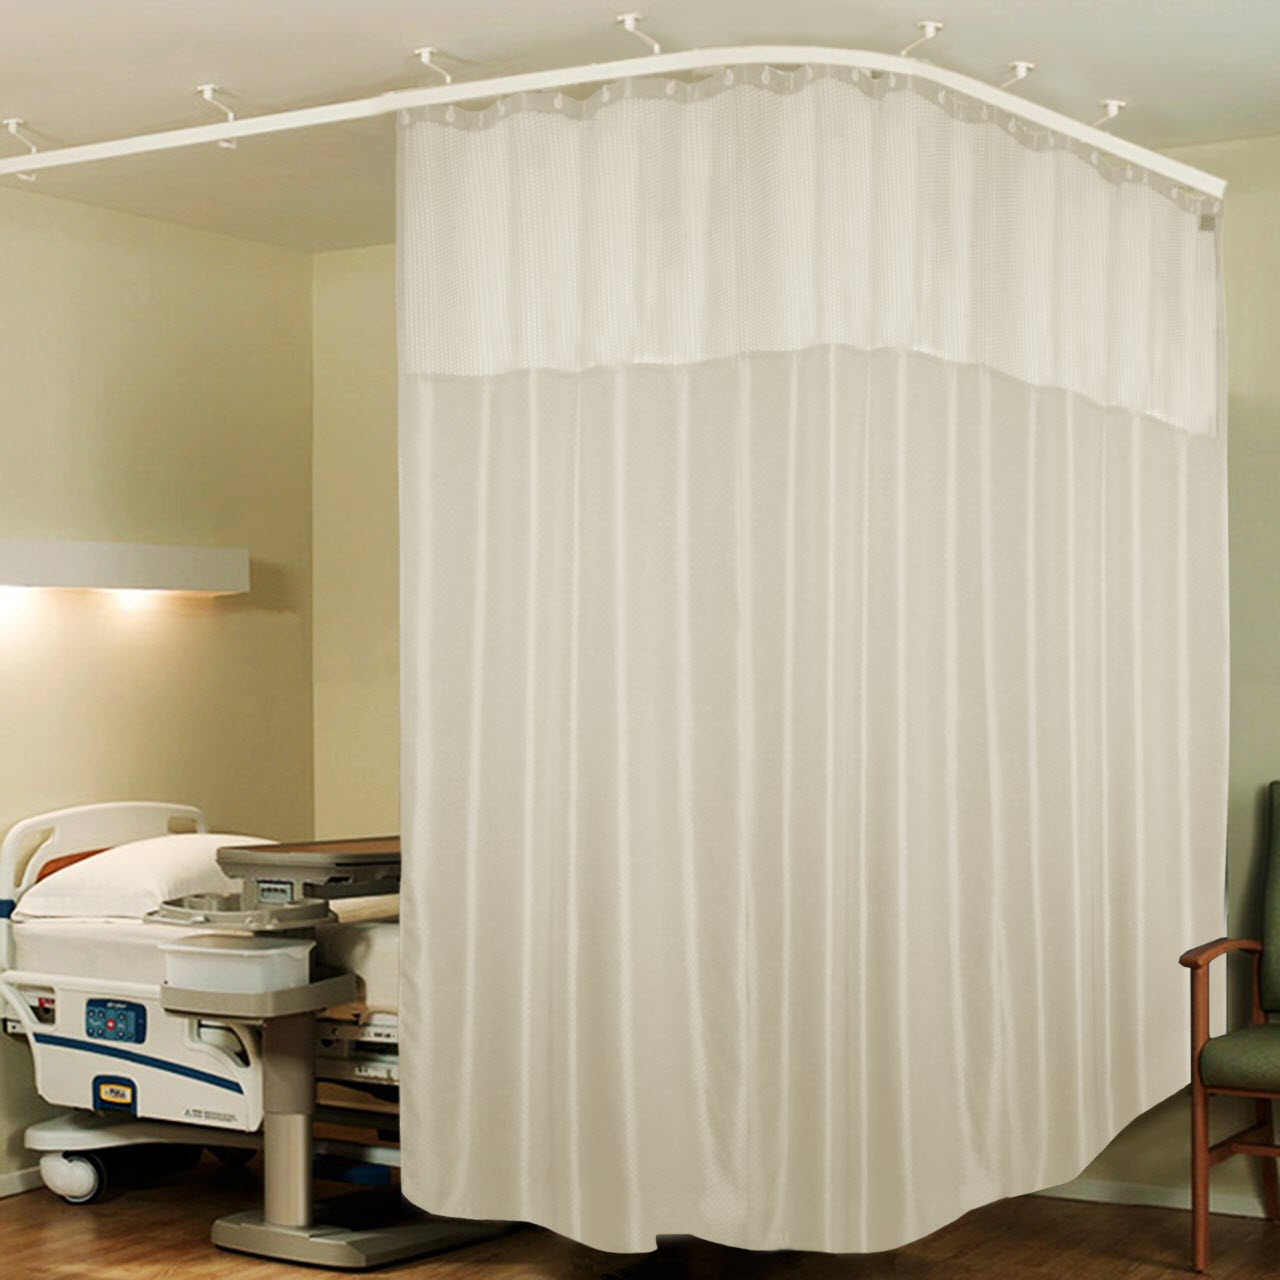 Hospital Partition Curtains, Clinic Curtains Size 10 FT W x 7 ft H, Channel Curtains with Net Fabric, 100% polyester 20 Rustfree Metal Eyelets 20 Plastic Hook, Cream, Zig Zag Design(10x7 FT, Pk of 1)